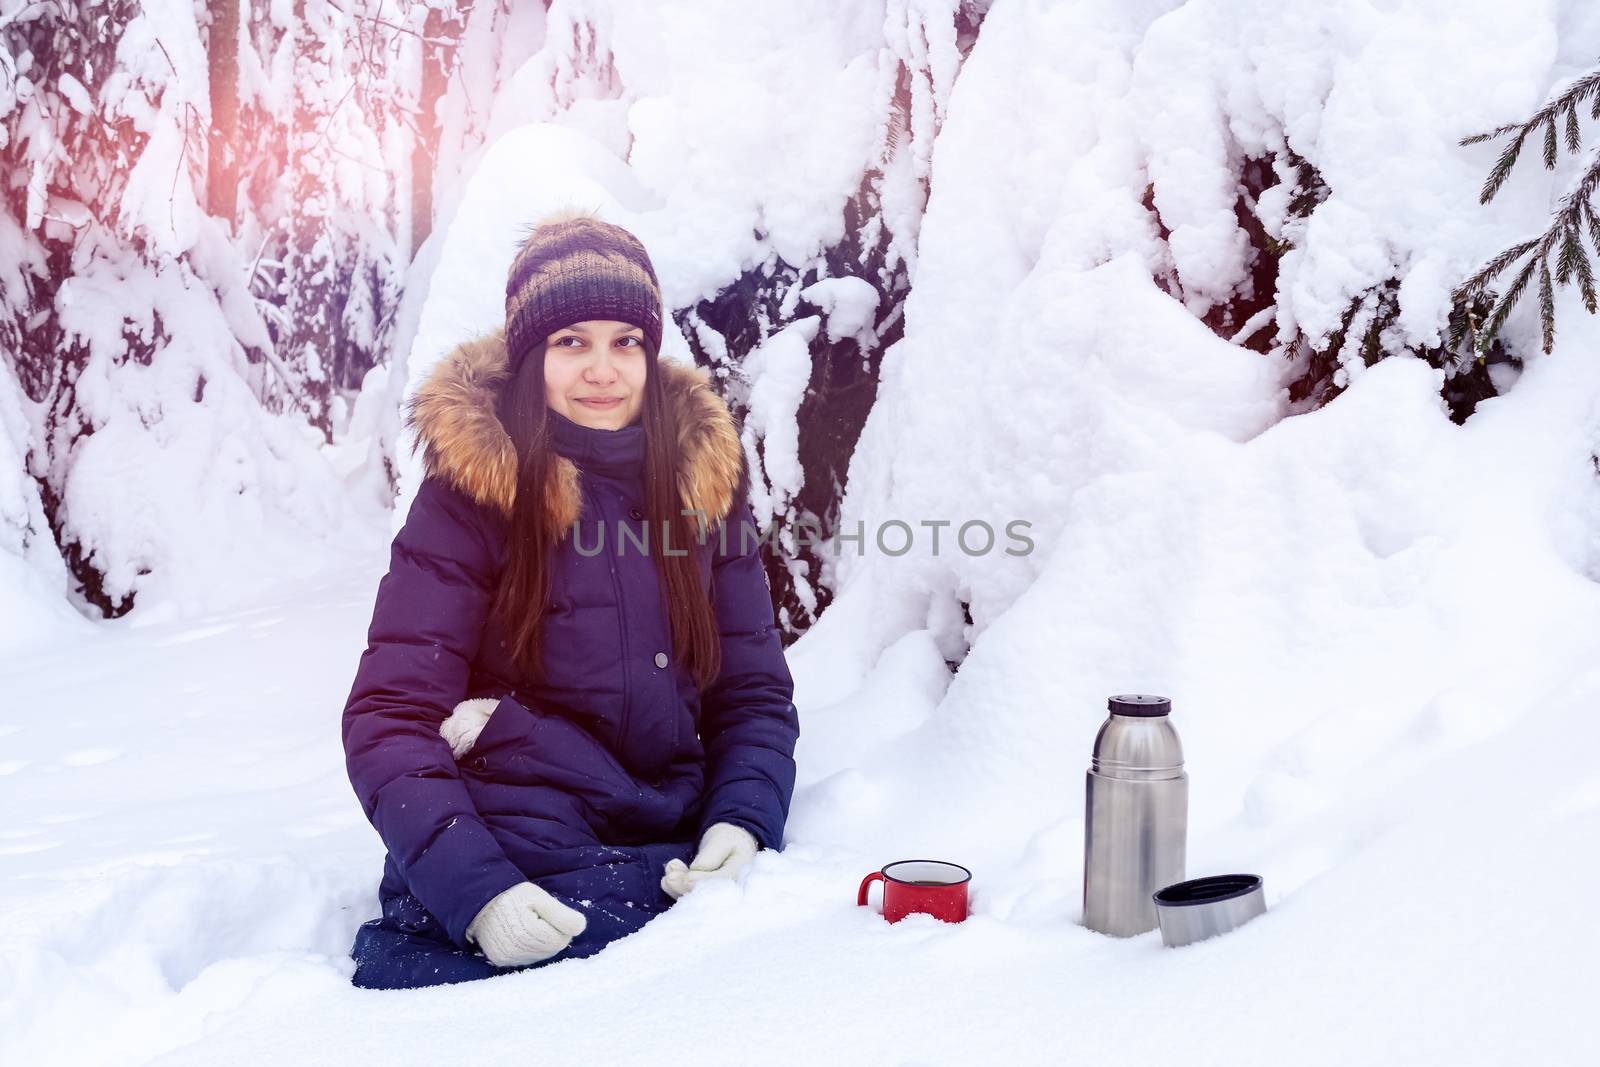 girl drinks coffee from a thermos while walking through a snowy winter forest.